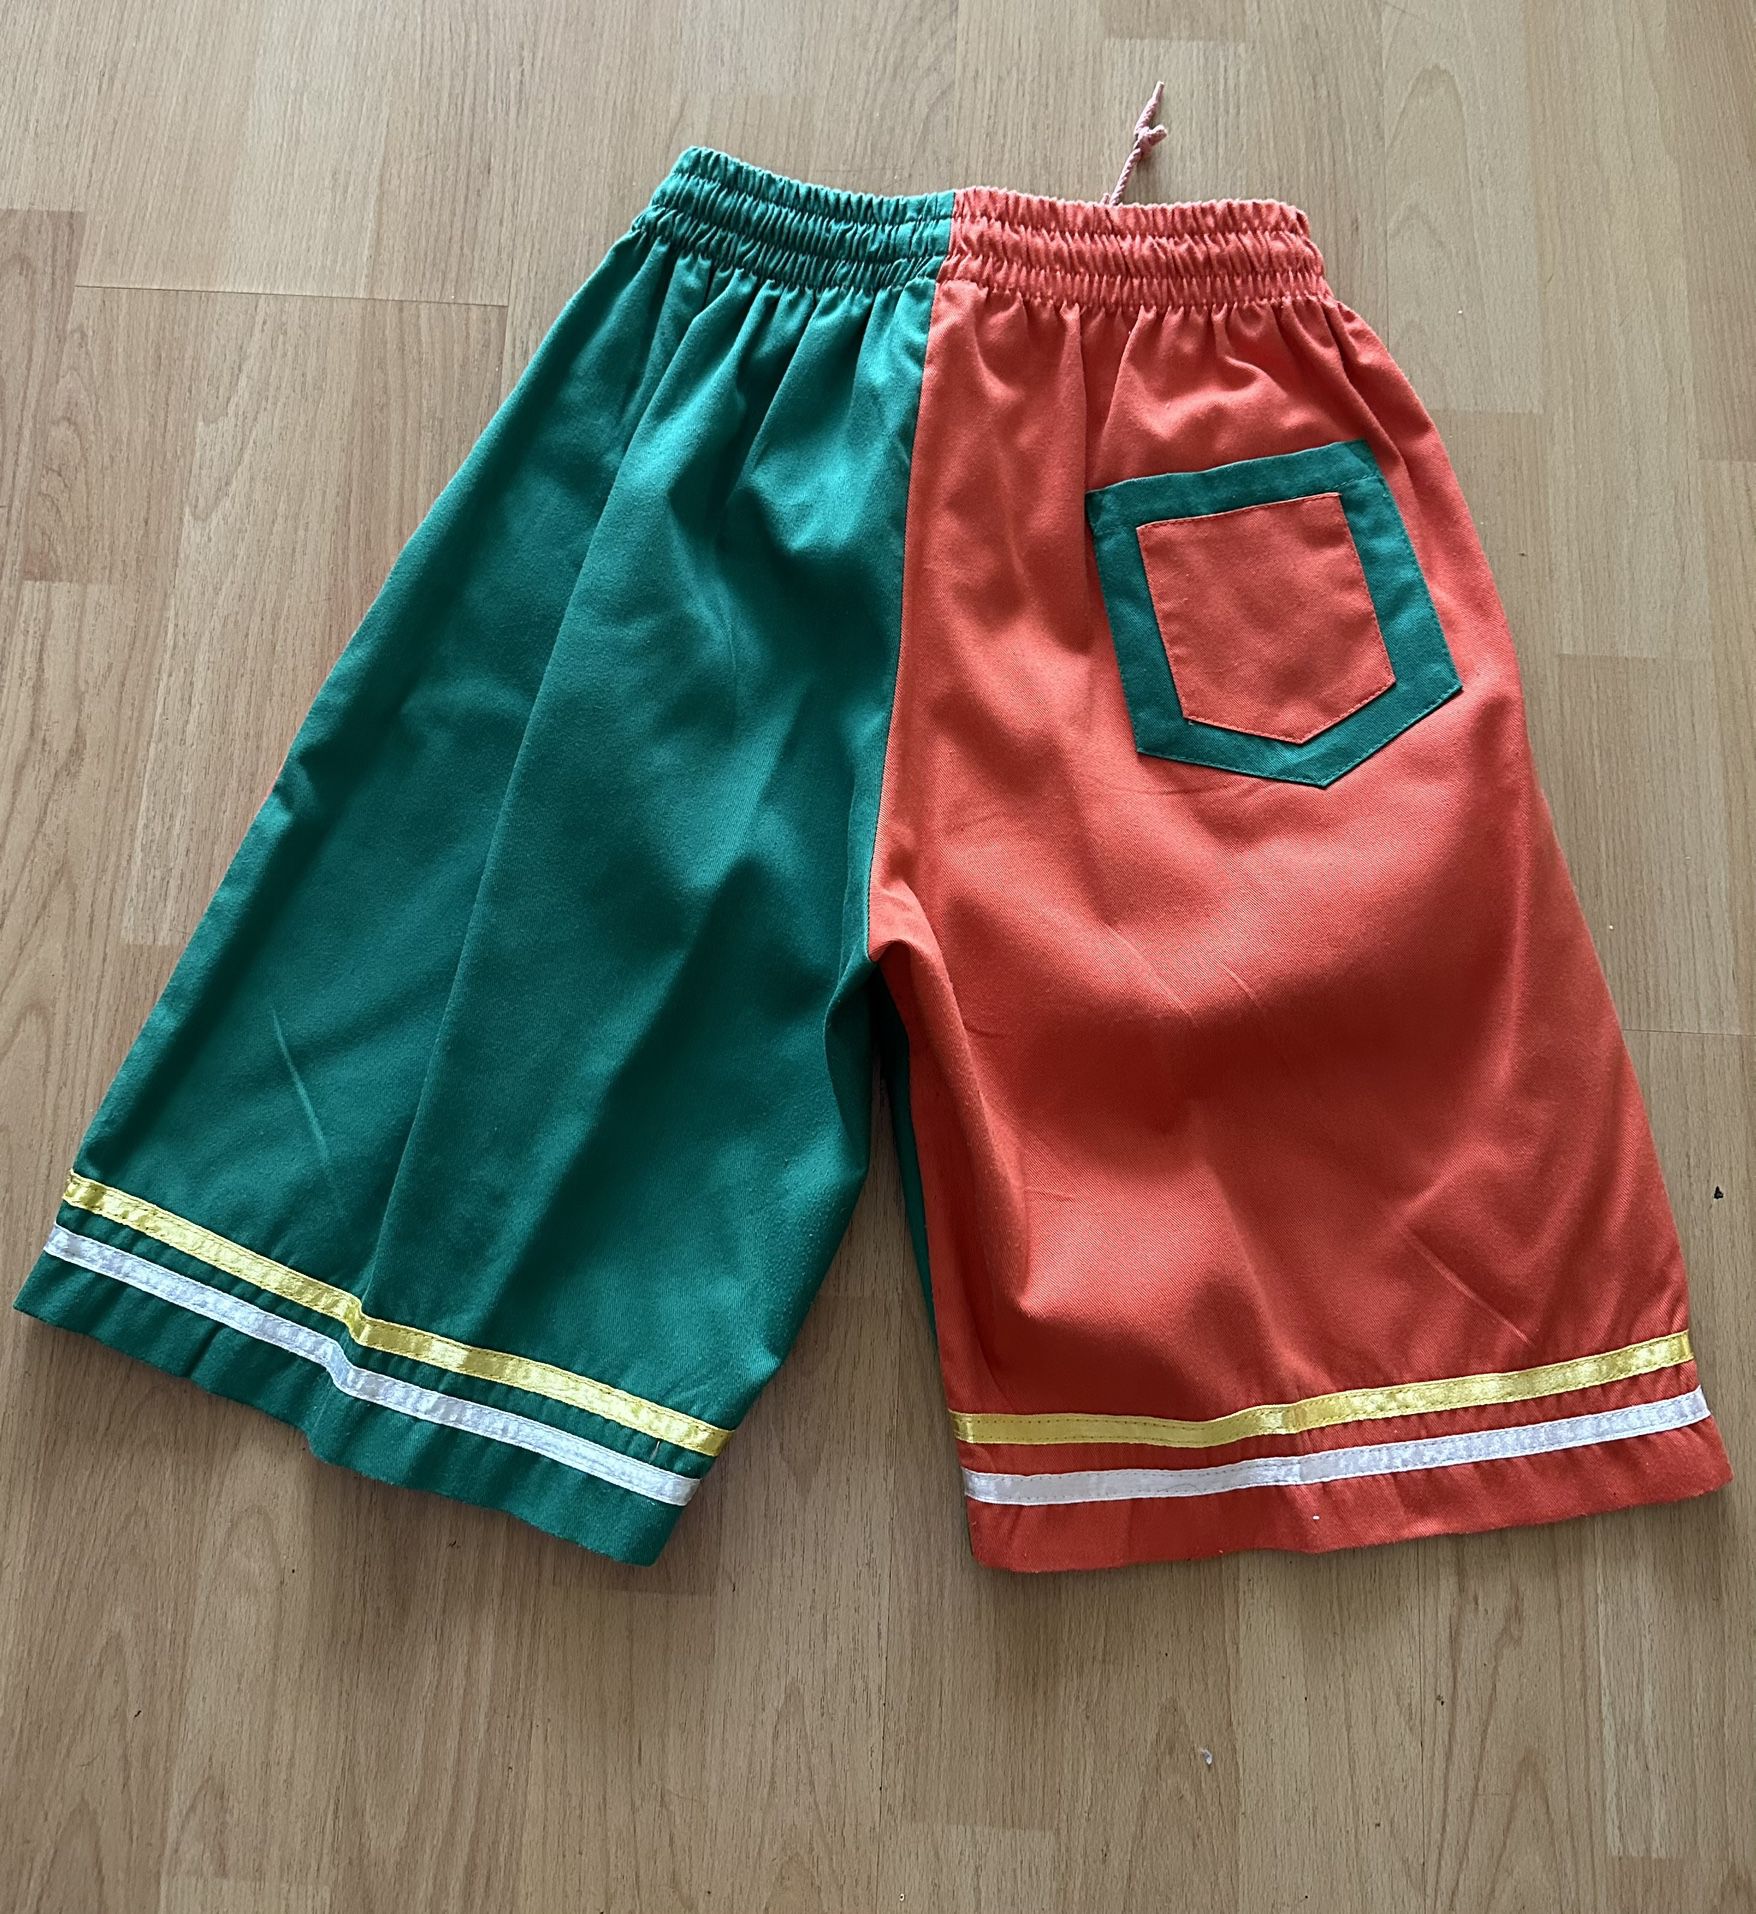 Vintage Early 90s Miami Hurricanes Baseball Jersey Set for Sale in Miami,  FL - OfferUp